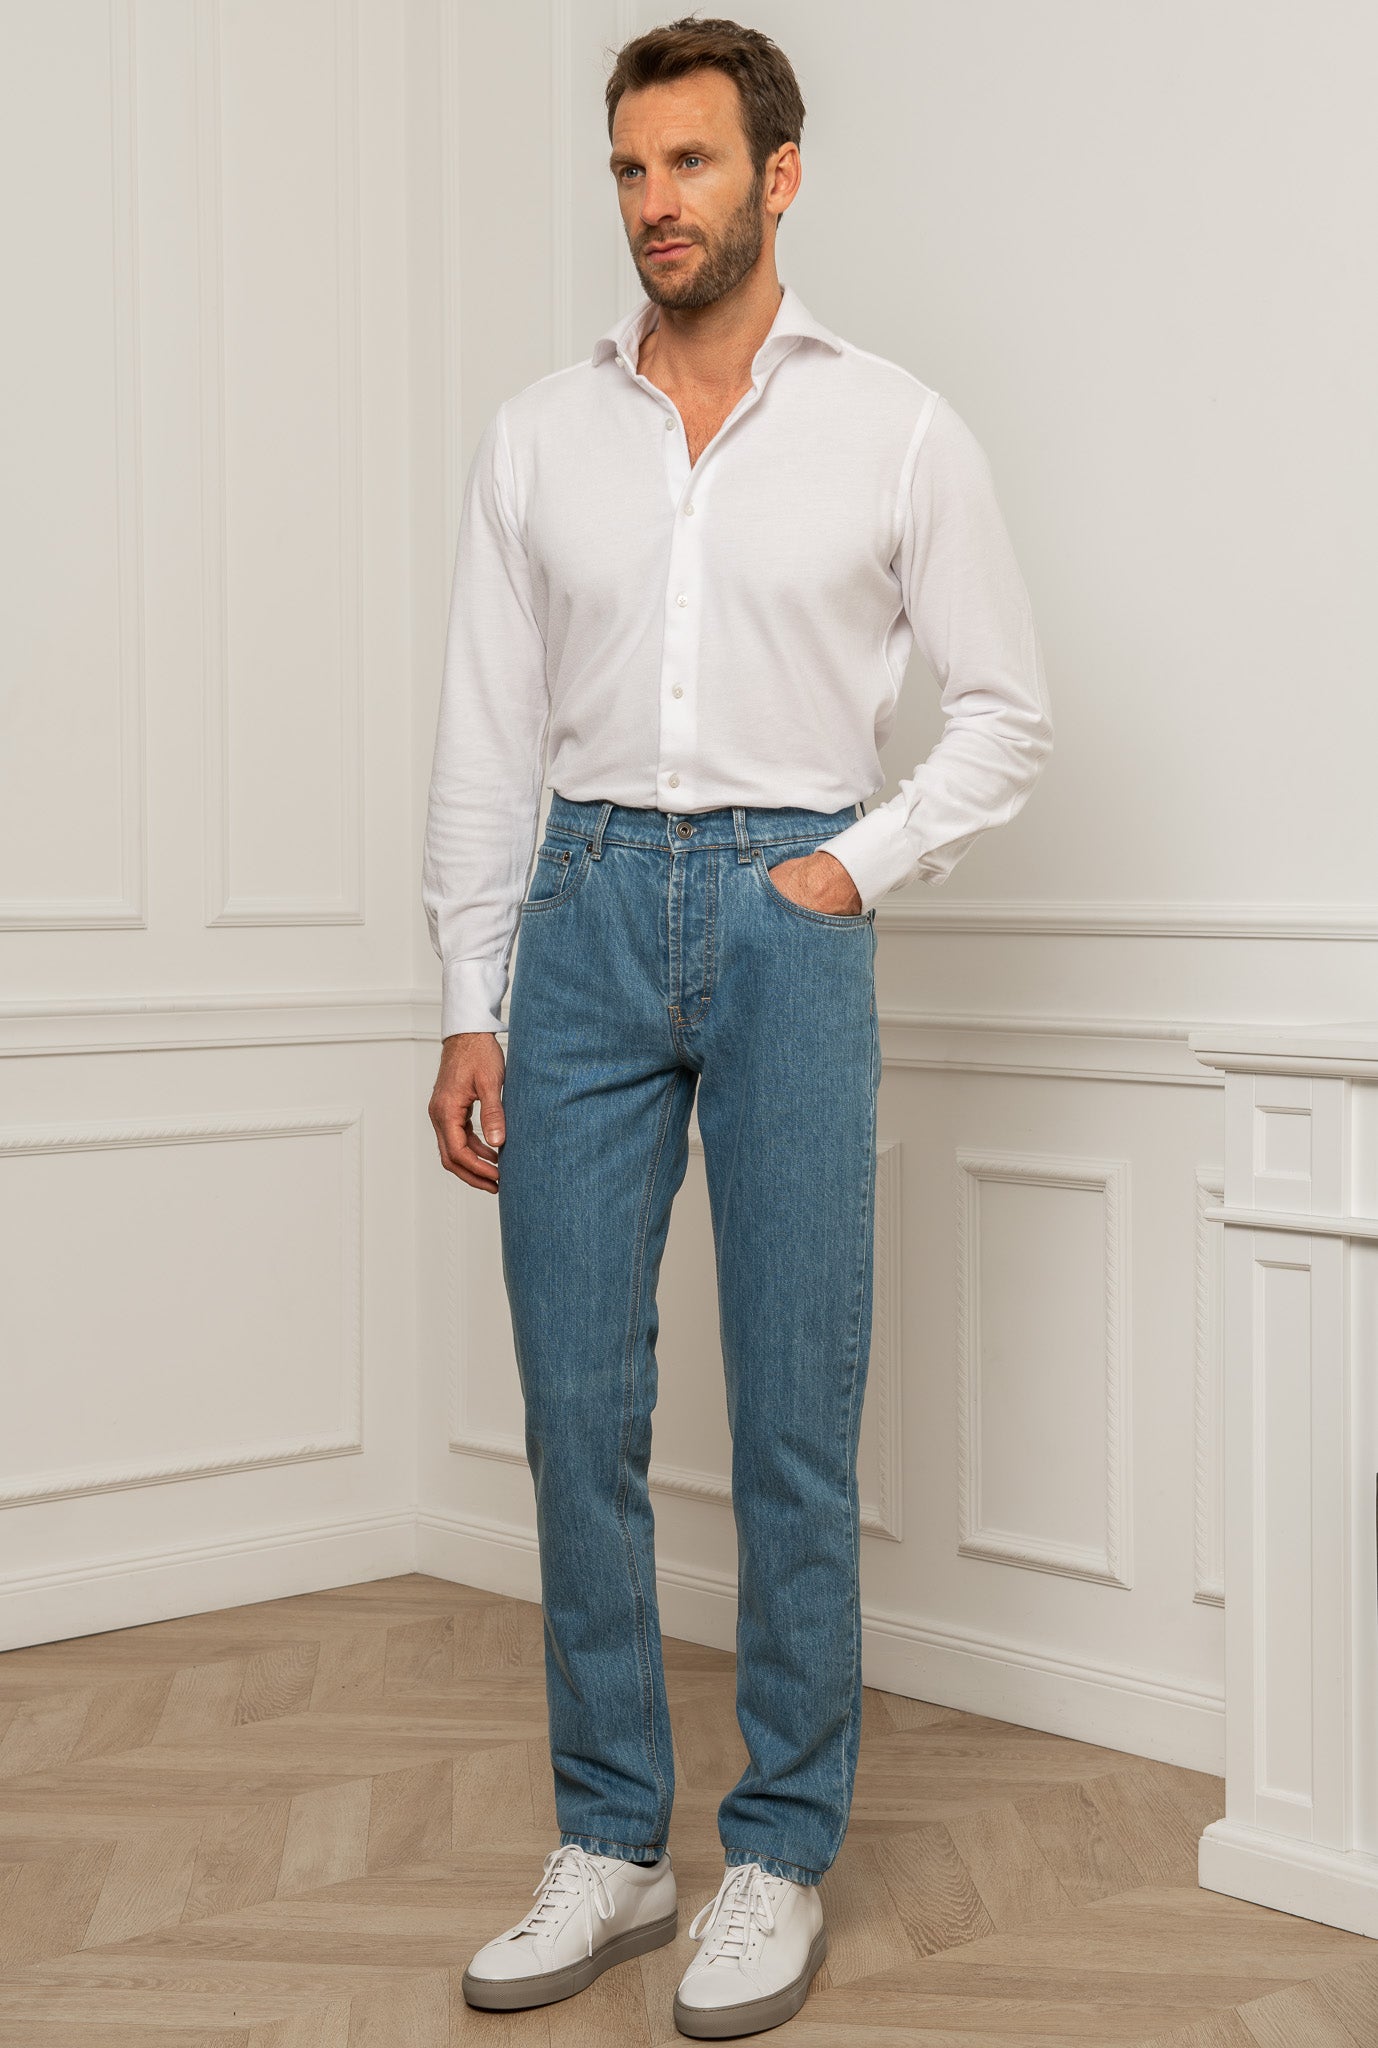  Blue Jeans, Jeans italiani, Jeans made in Italy, jeans vita alta, Jeans candiani, Jeans bleus, jeans italiens, jeans taille haute, jeans Candiani, Blue Jeans, Italian jeans, high-waisted jeans, Candiani jeans